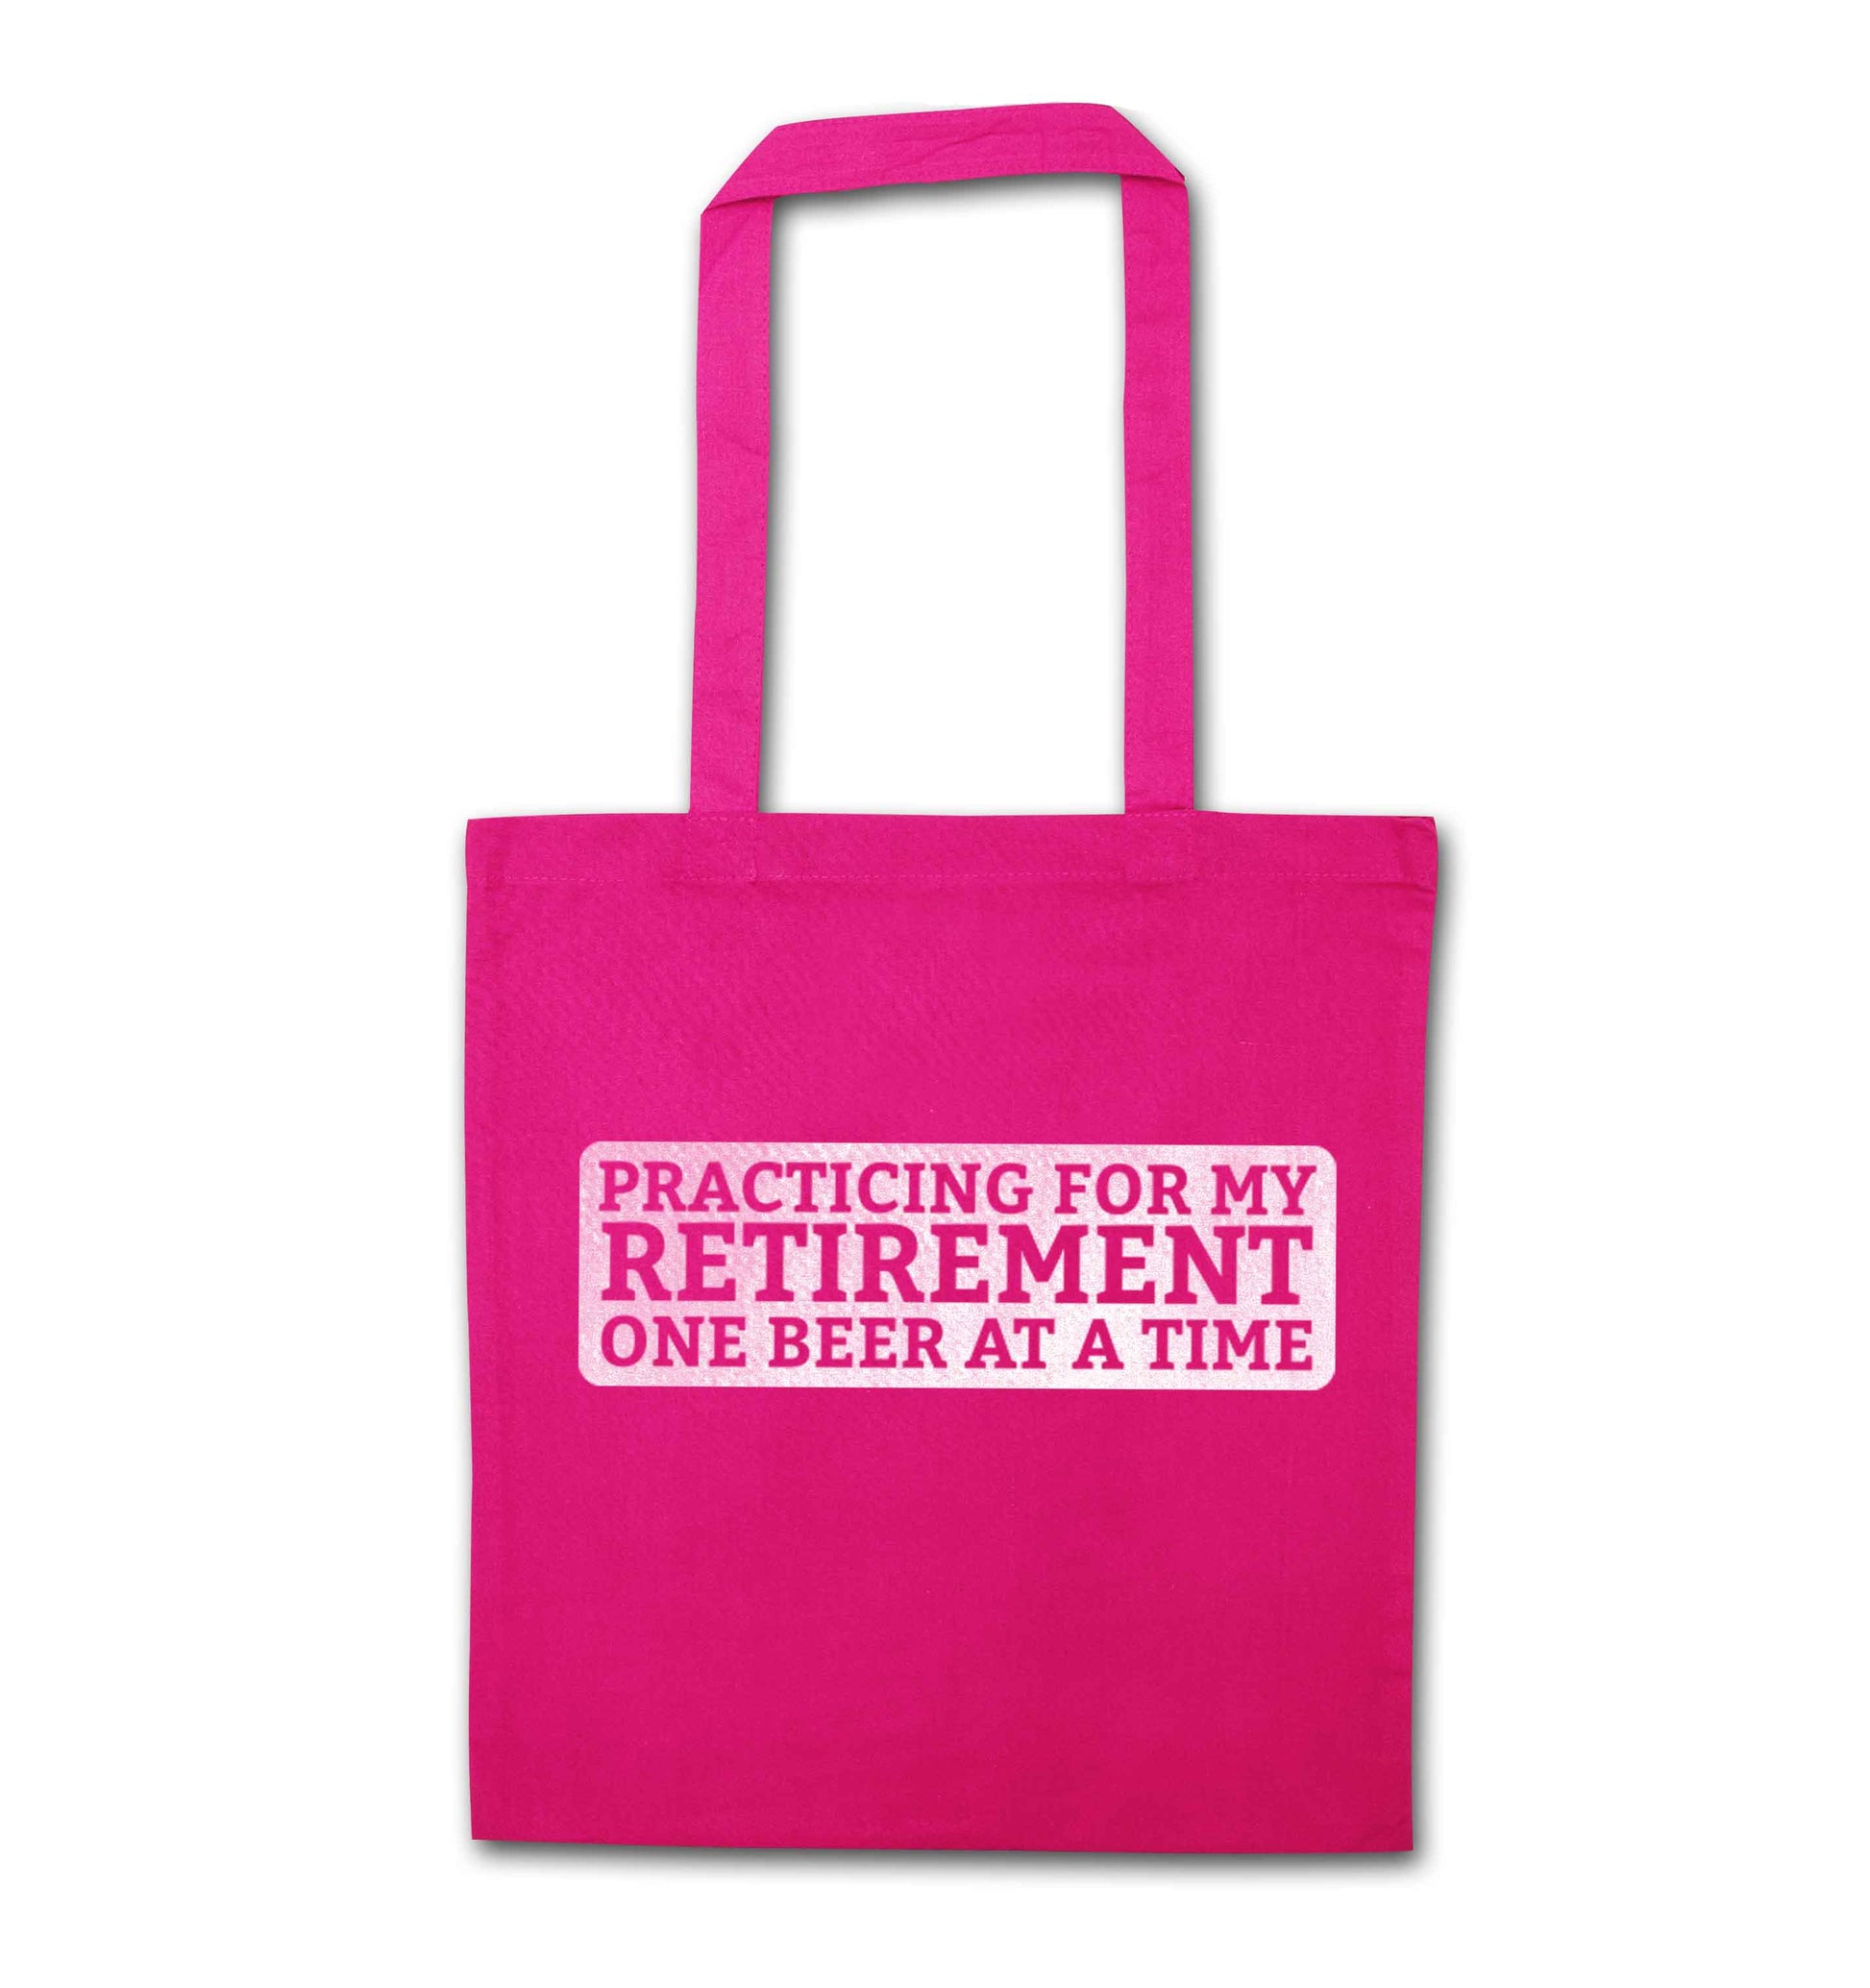 Practicing for my Retirement one Beer at a Time pink tote bag